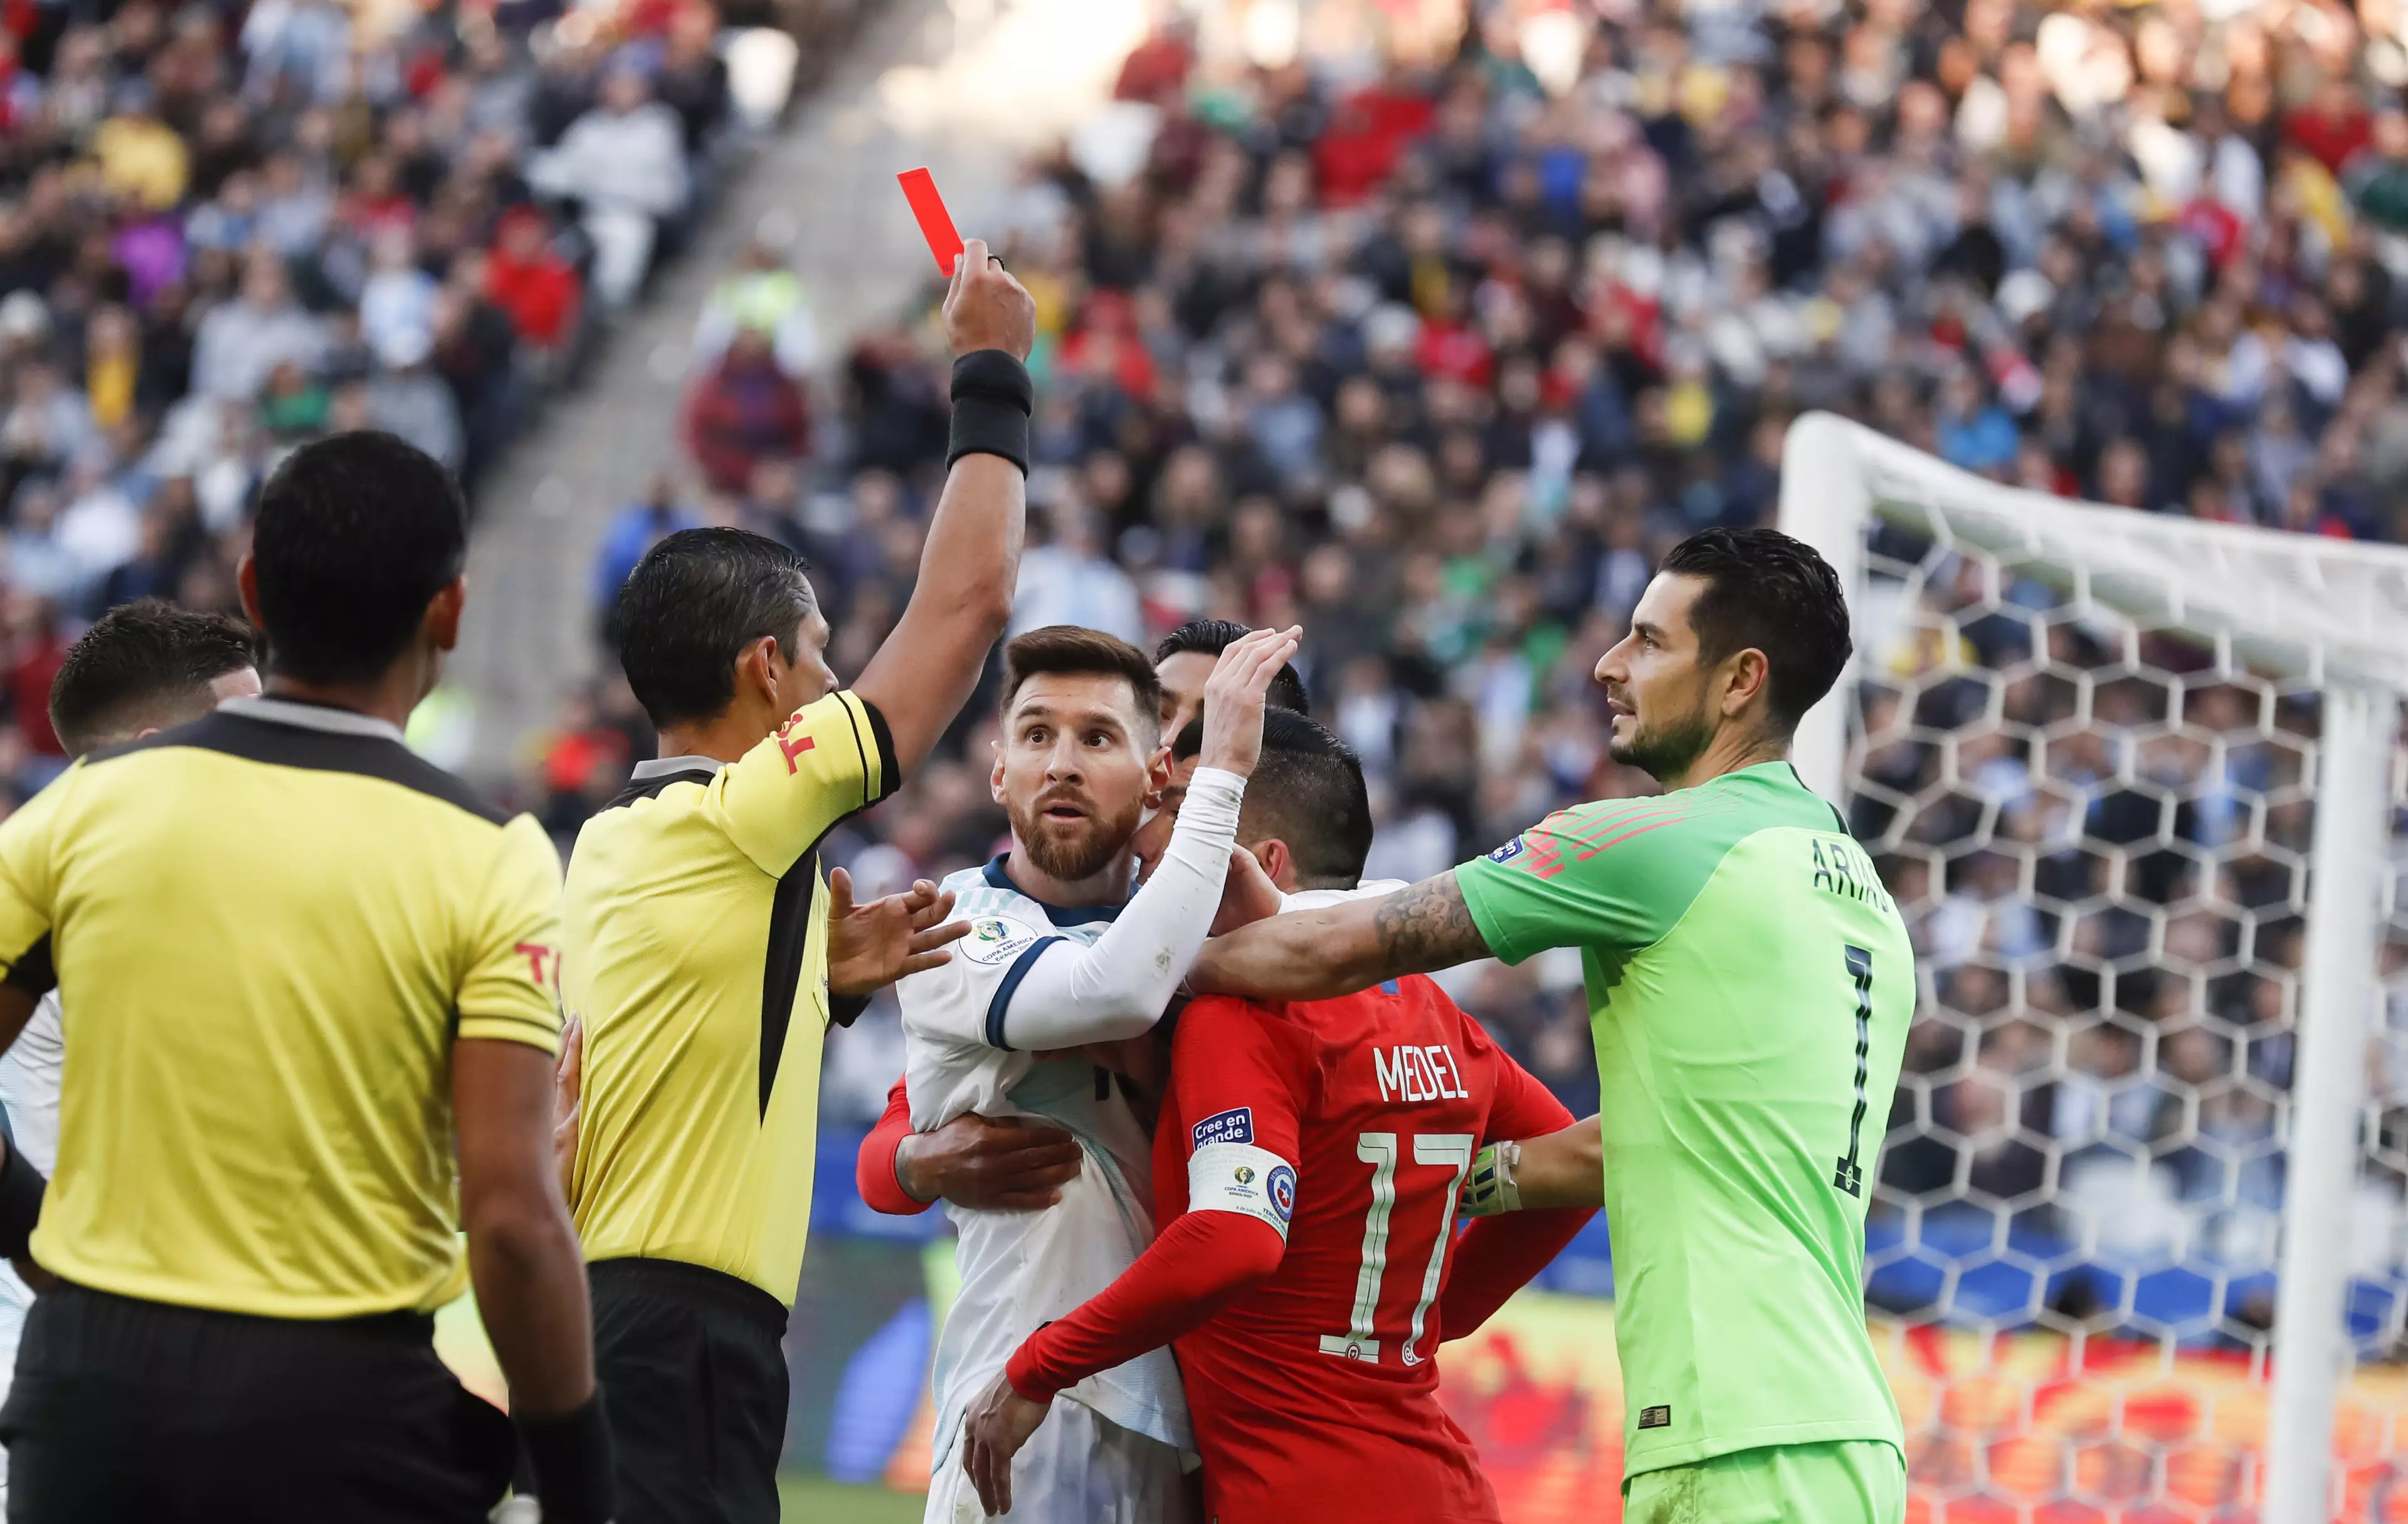 Messi was sent off against Chile. Image: PA Images